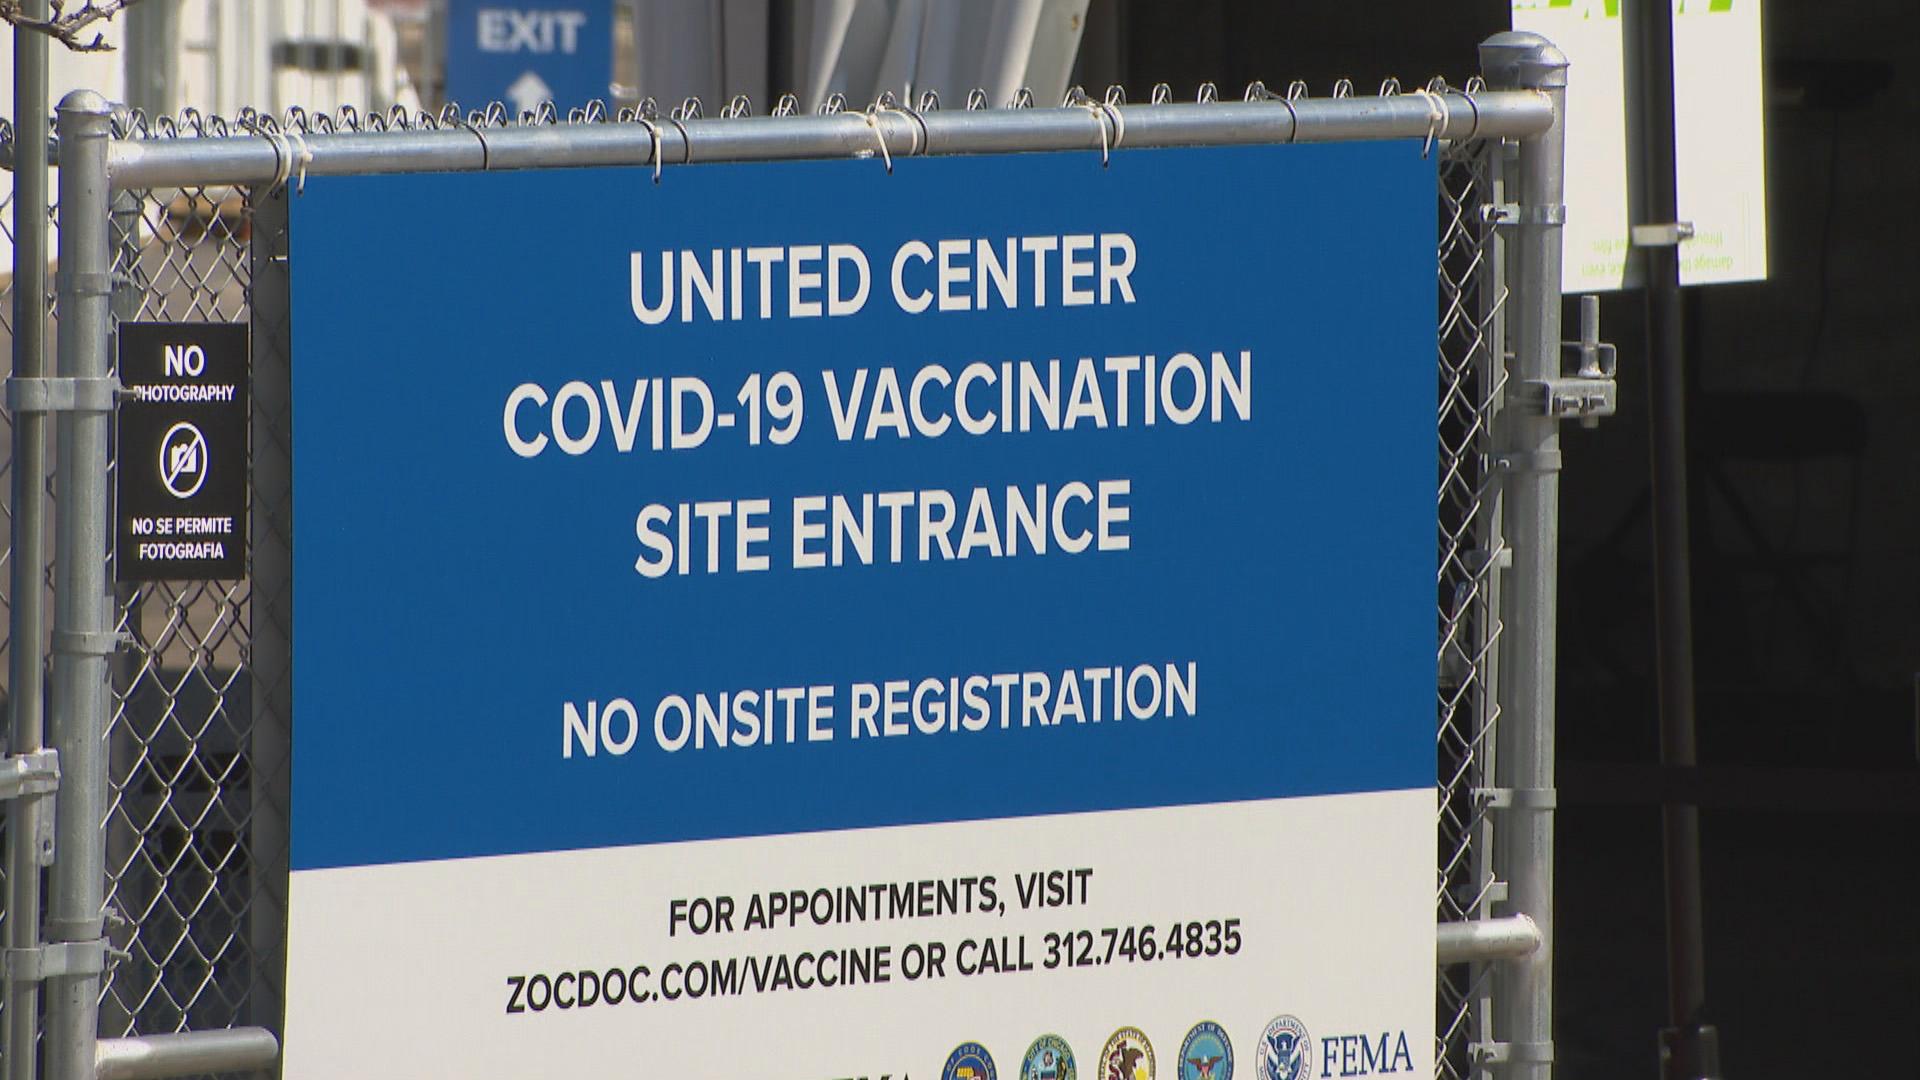 A sign at the United Center mass vaccination site on March 29, 2021. (WTTW News)